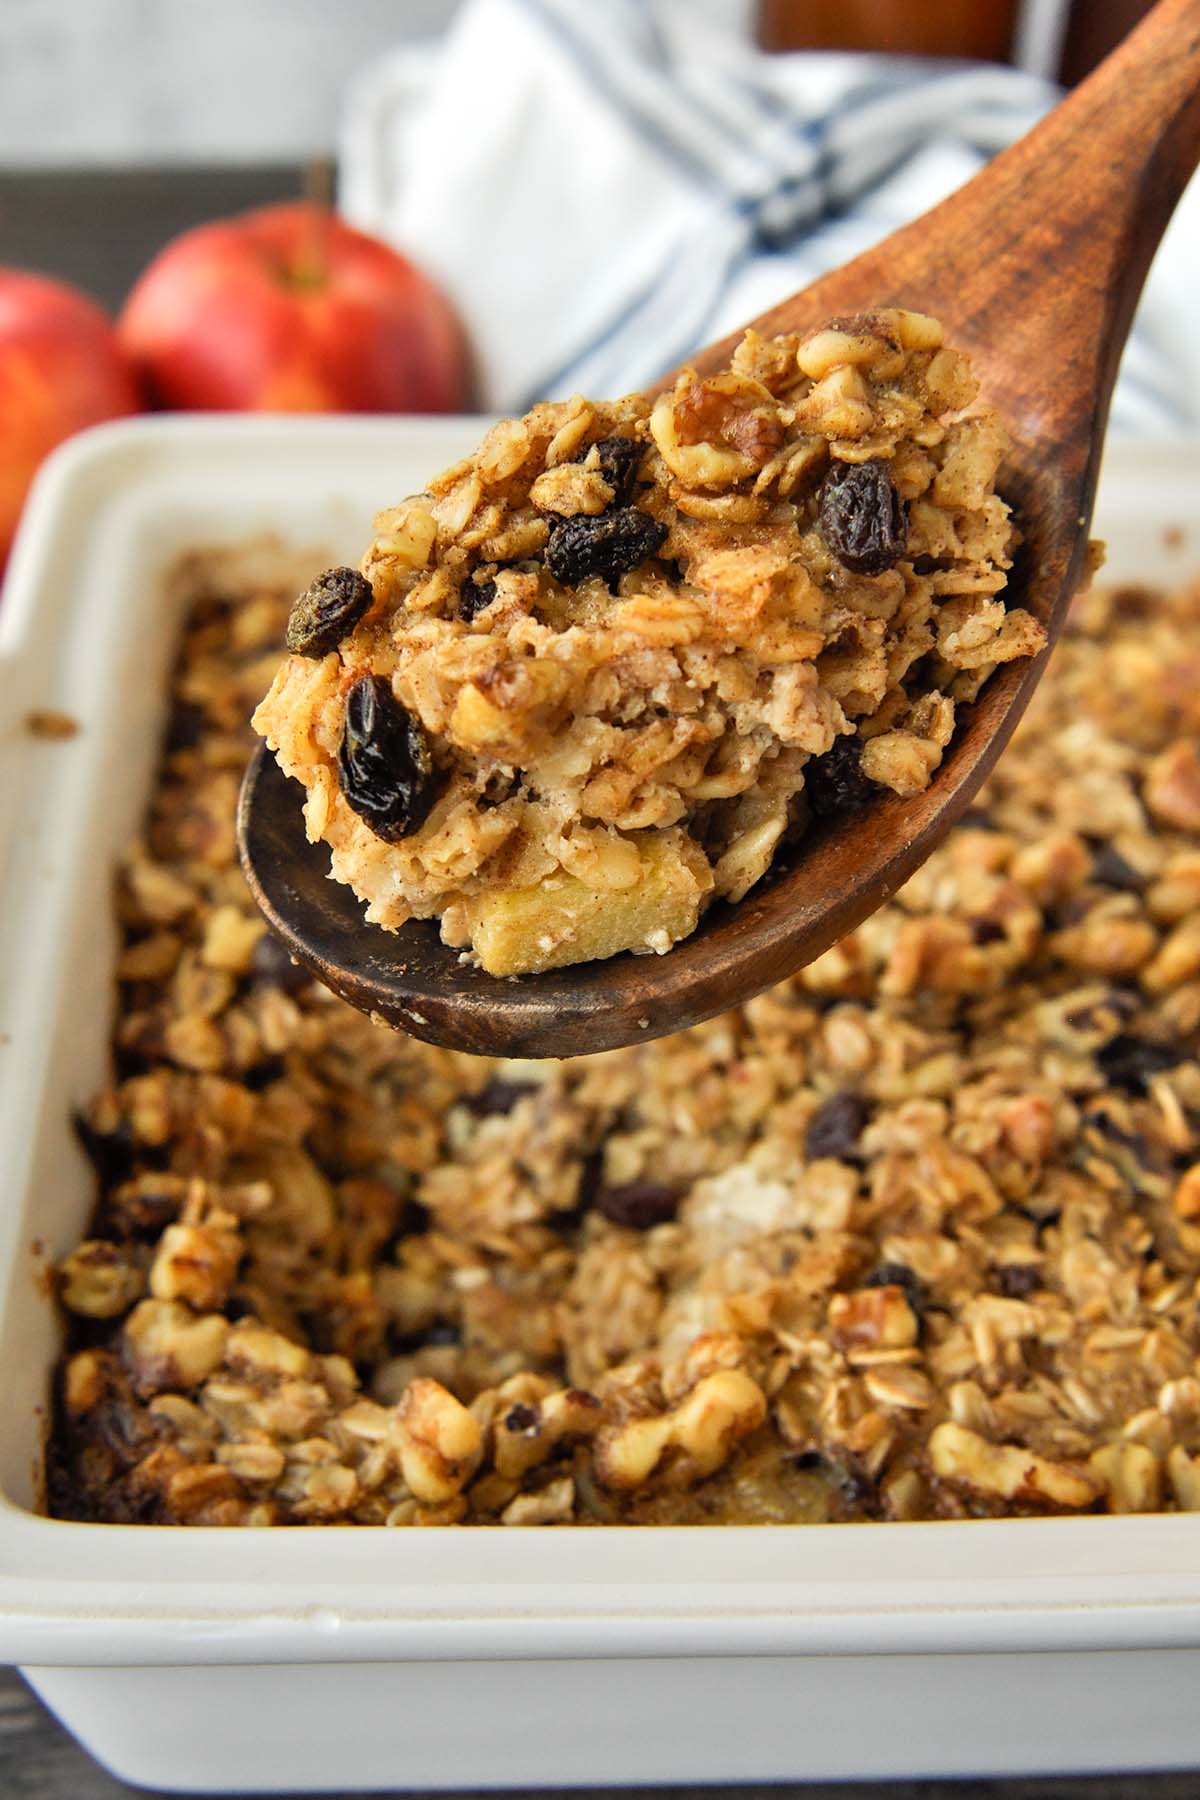 A big spoonful of baked oatmeal over the baking dish with a striped towel and apples in the background.